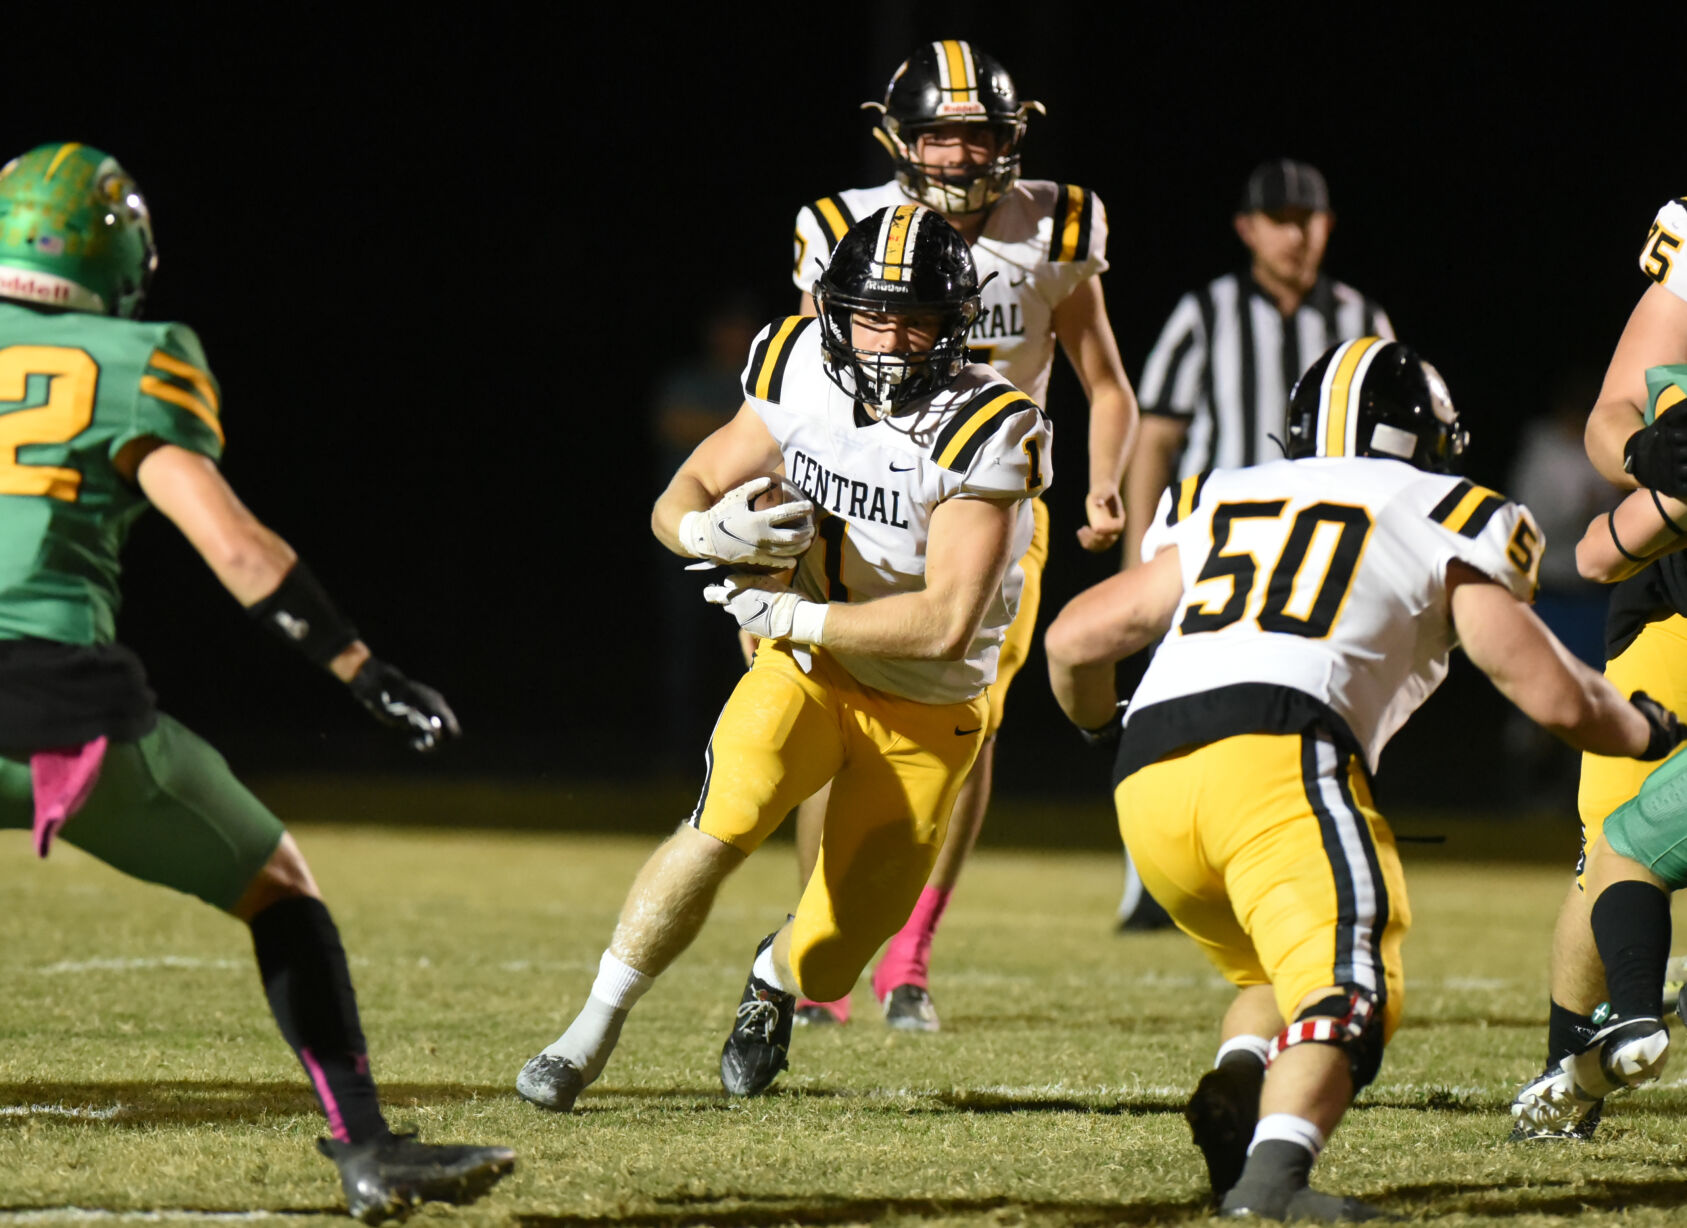 Johnson Central Dominates Greenup County with 393 Rushing Yards in 14th Consecutive Victory